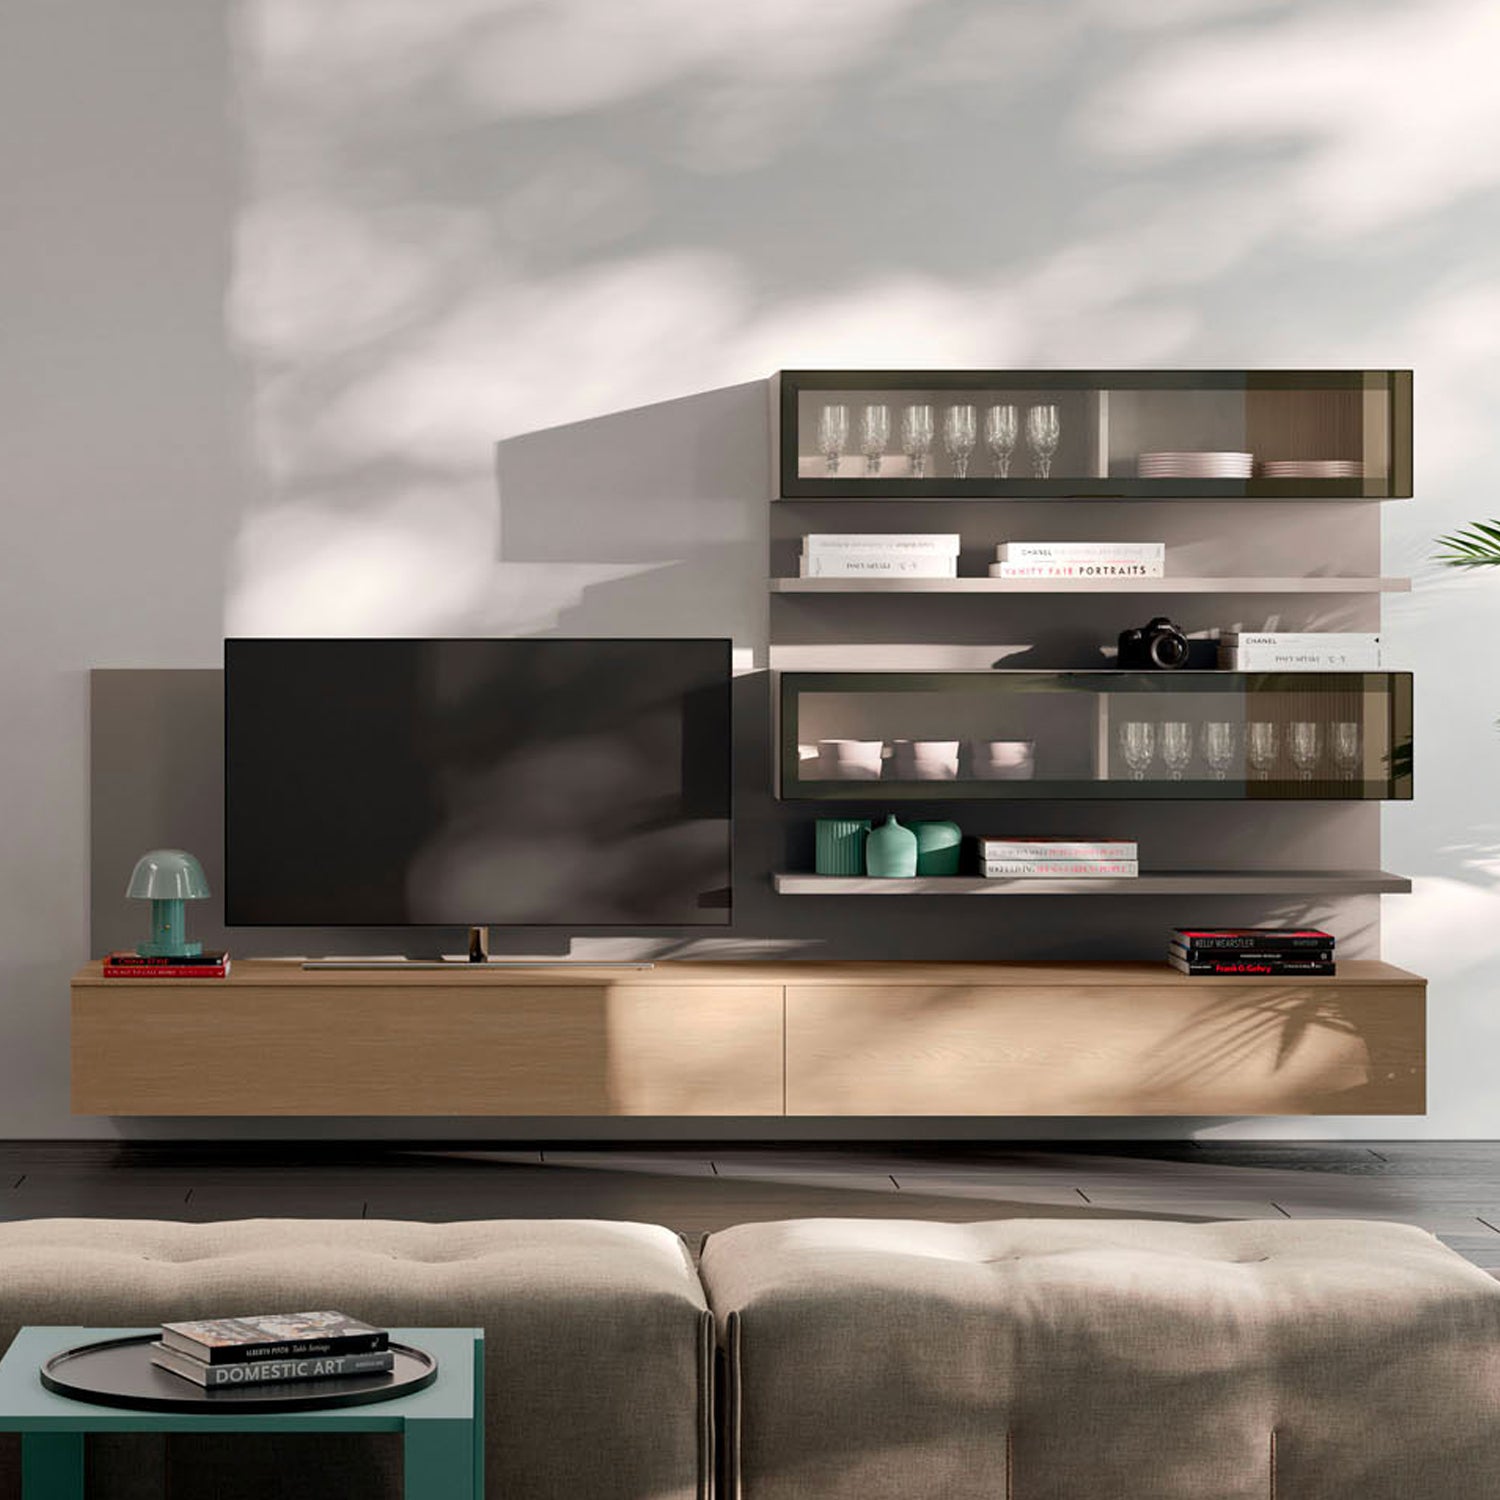 Light Day 16 Tv media unit with boiserie by Orme Design